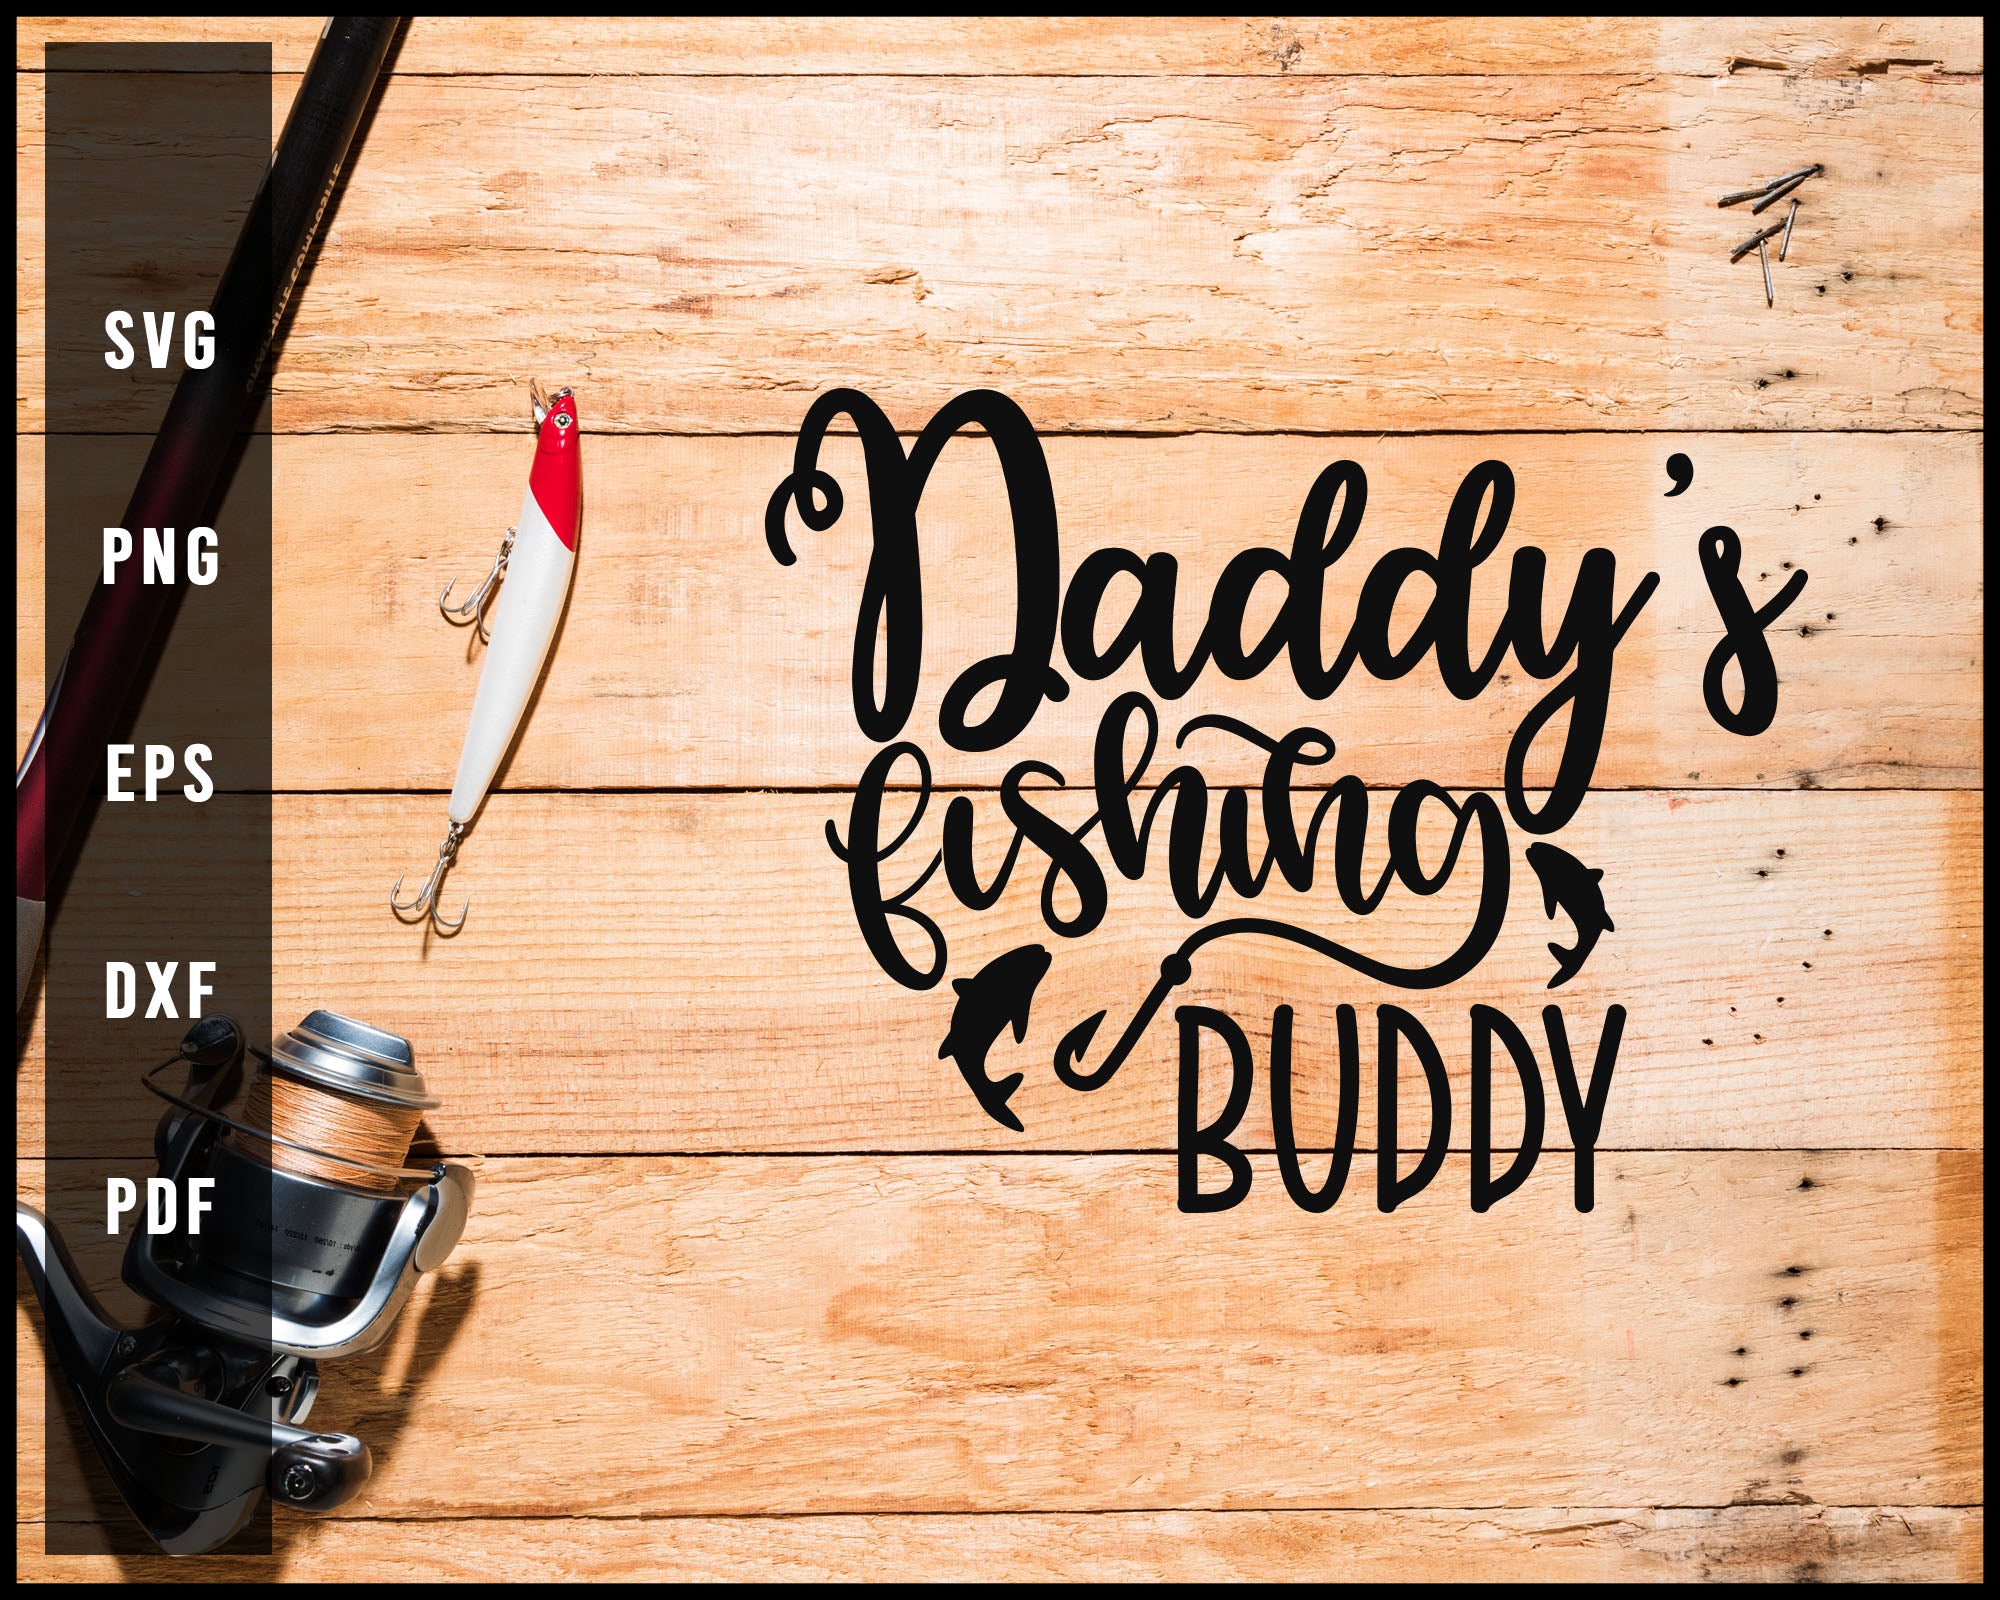 Daddy's Fishing Buddy svg png Silhouette Designs For Cricut And Printable Files